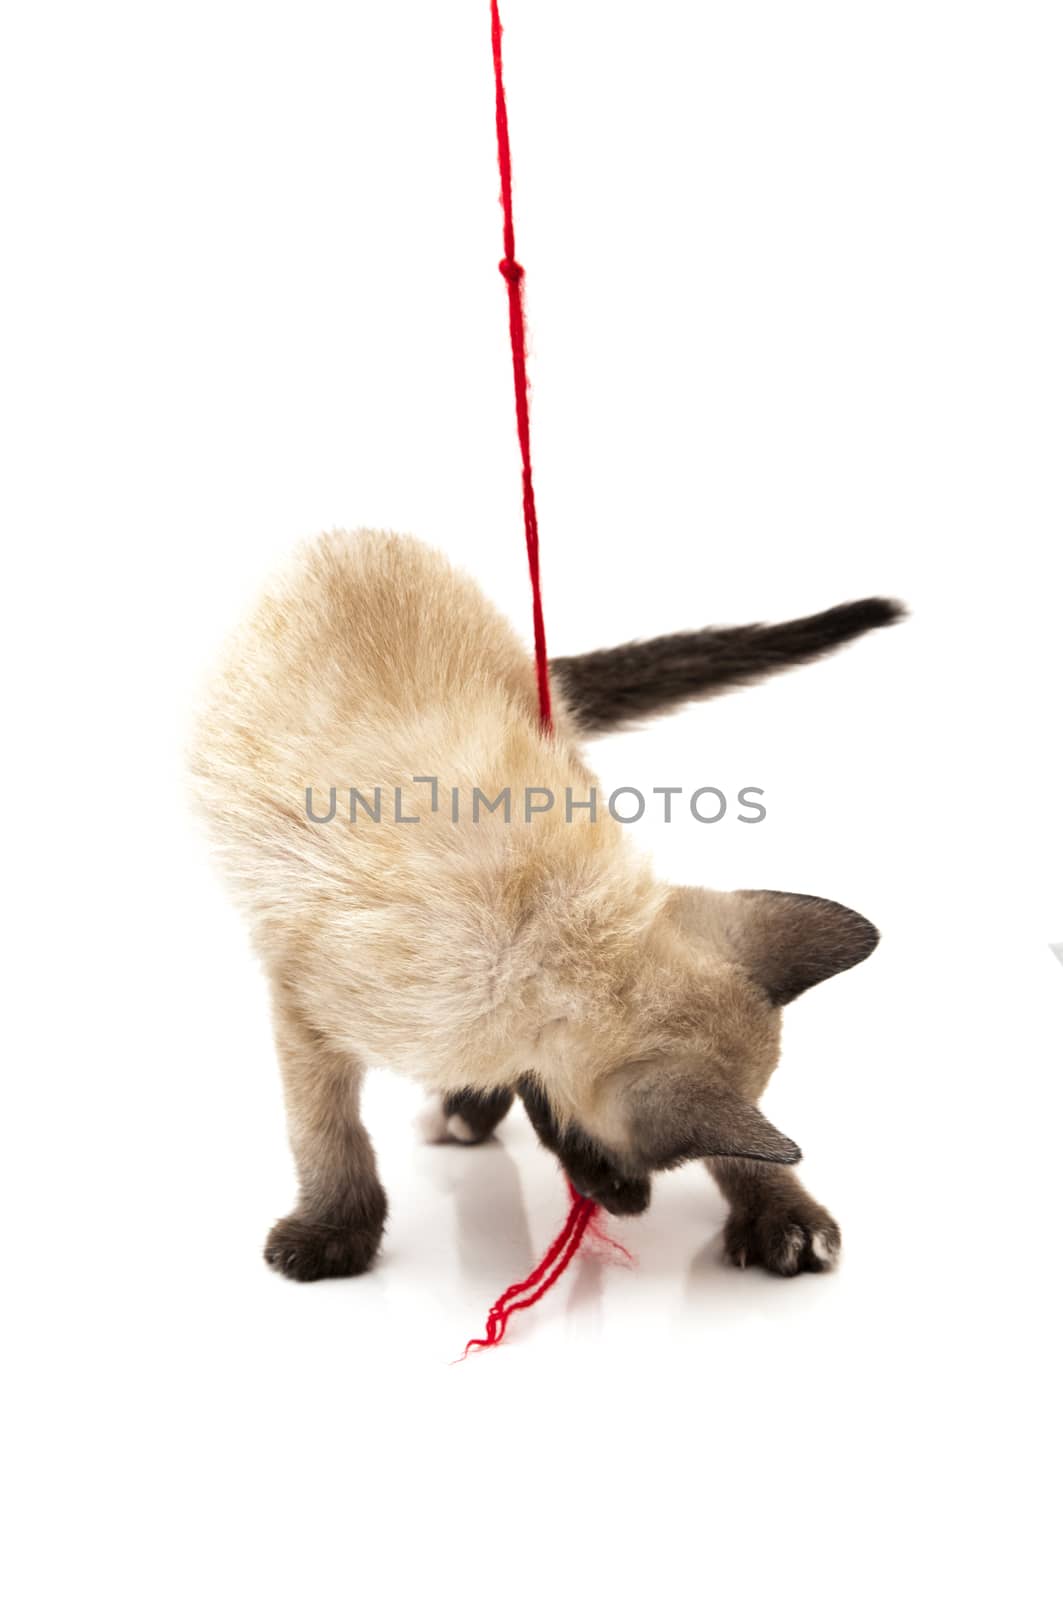 cat playing with ball of thread on a white background